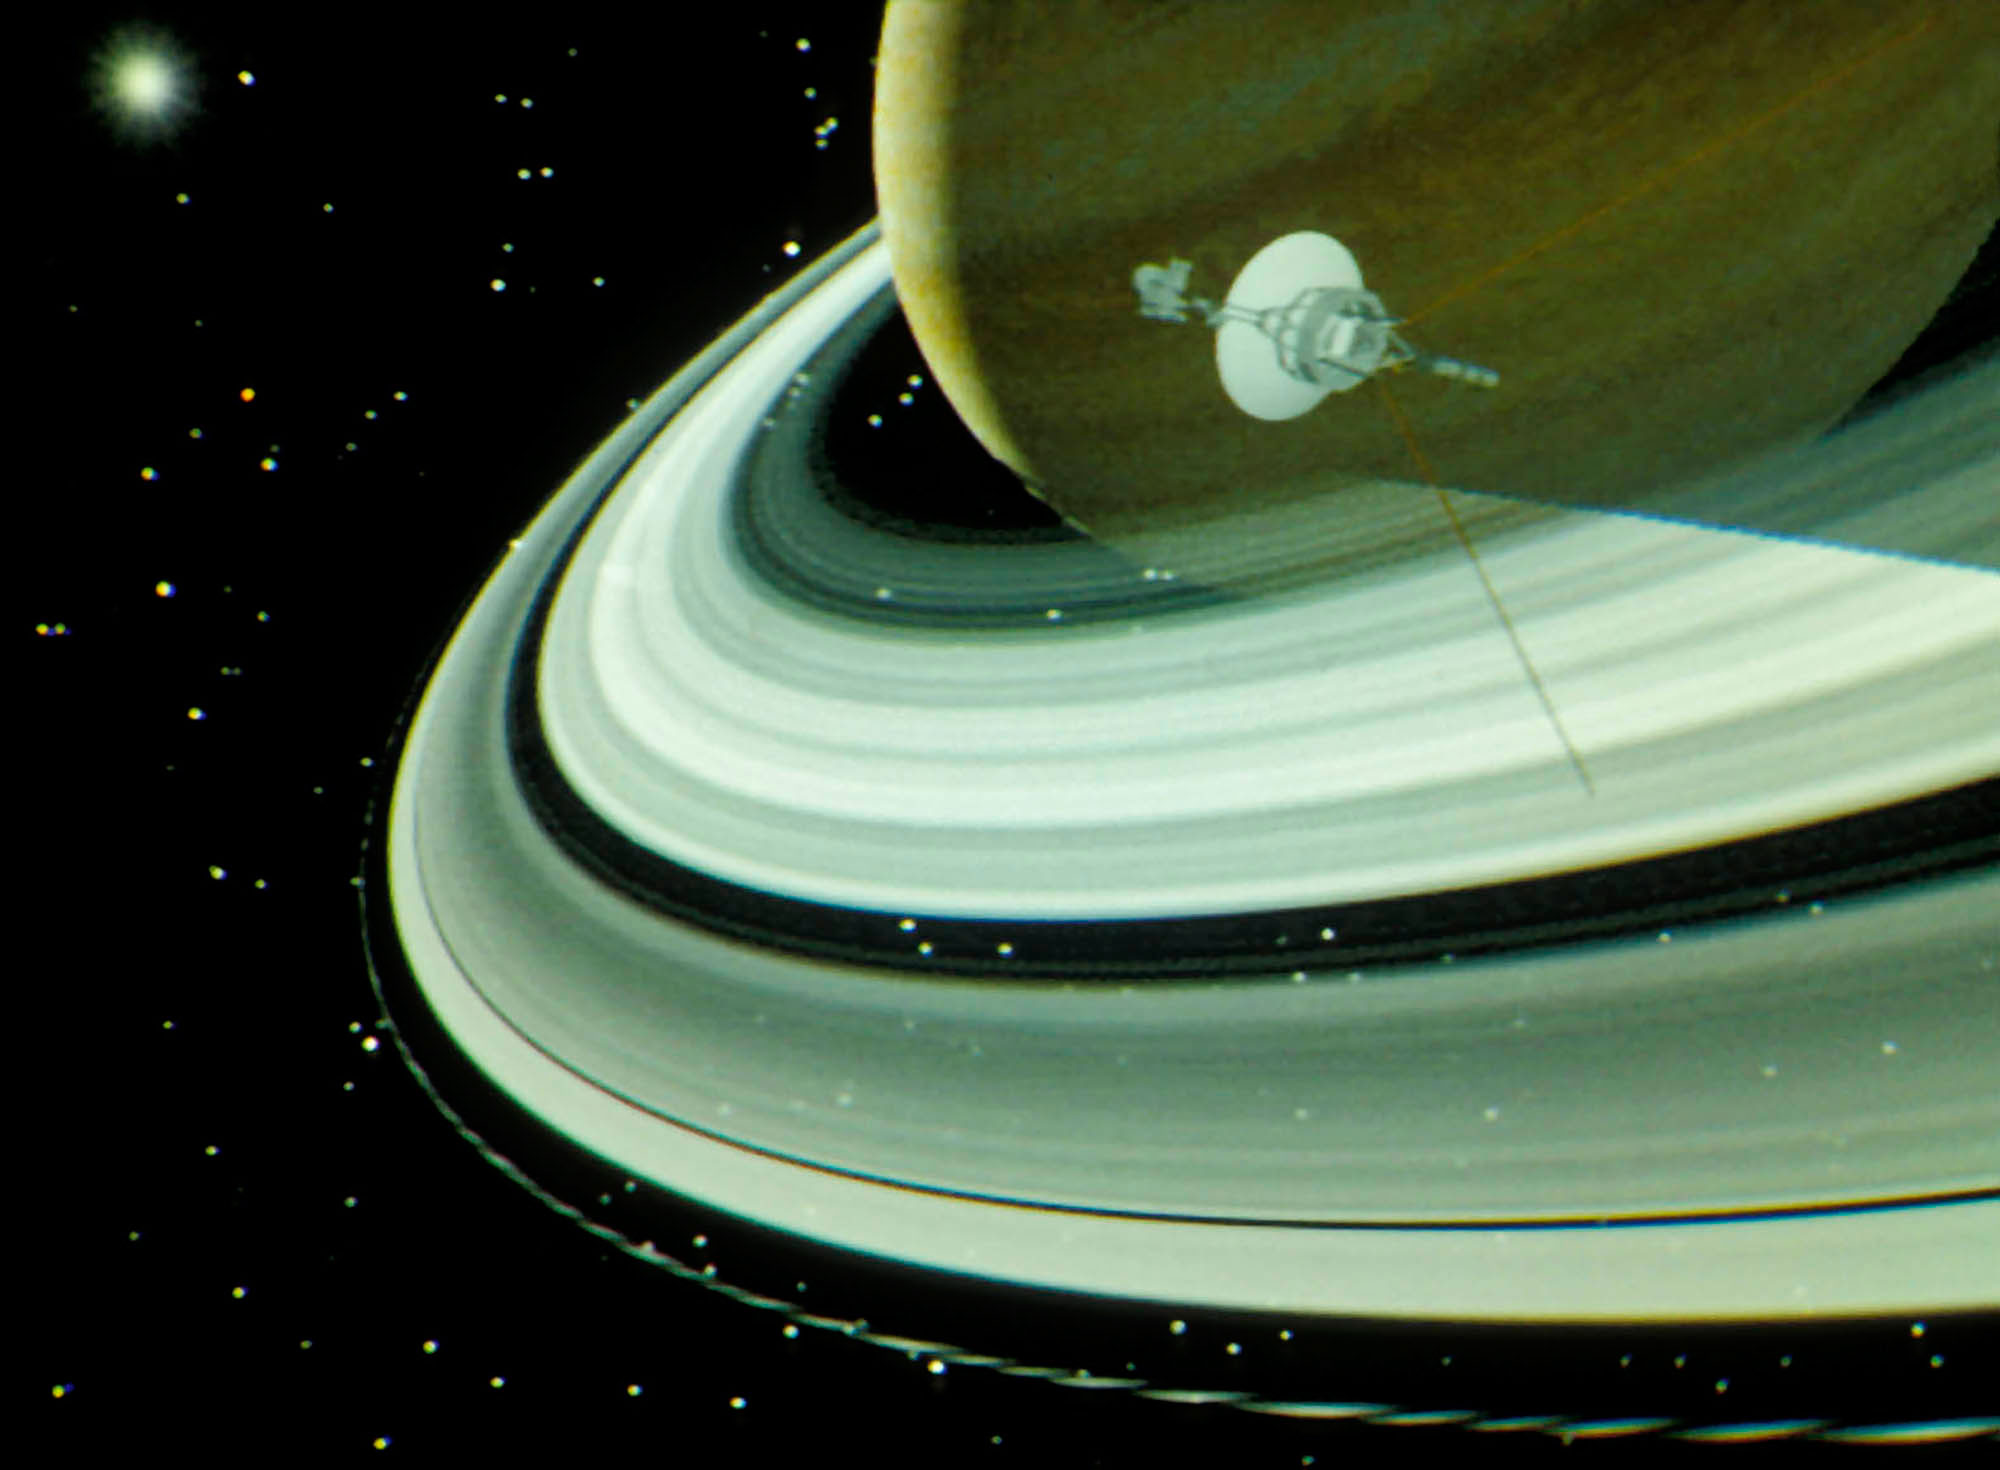 Image from the computer animation of the Voyager Saturn encounter, created by Blinn and Kohlhase, which was so important for public outreach for the missions. Credit: Charles Kohlhase